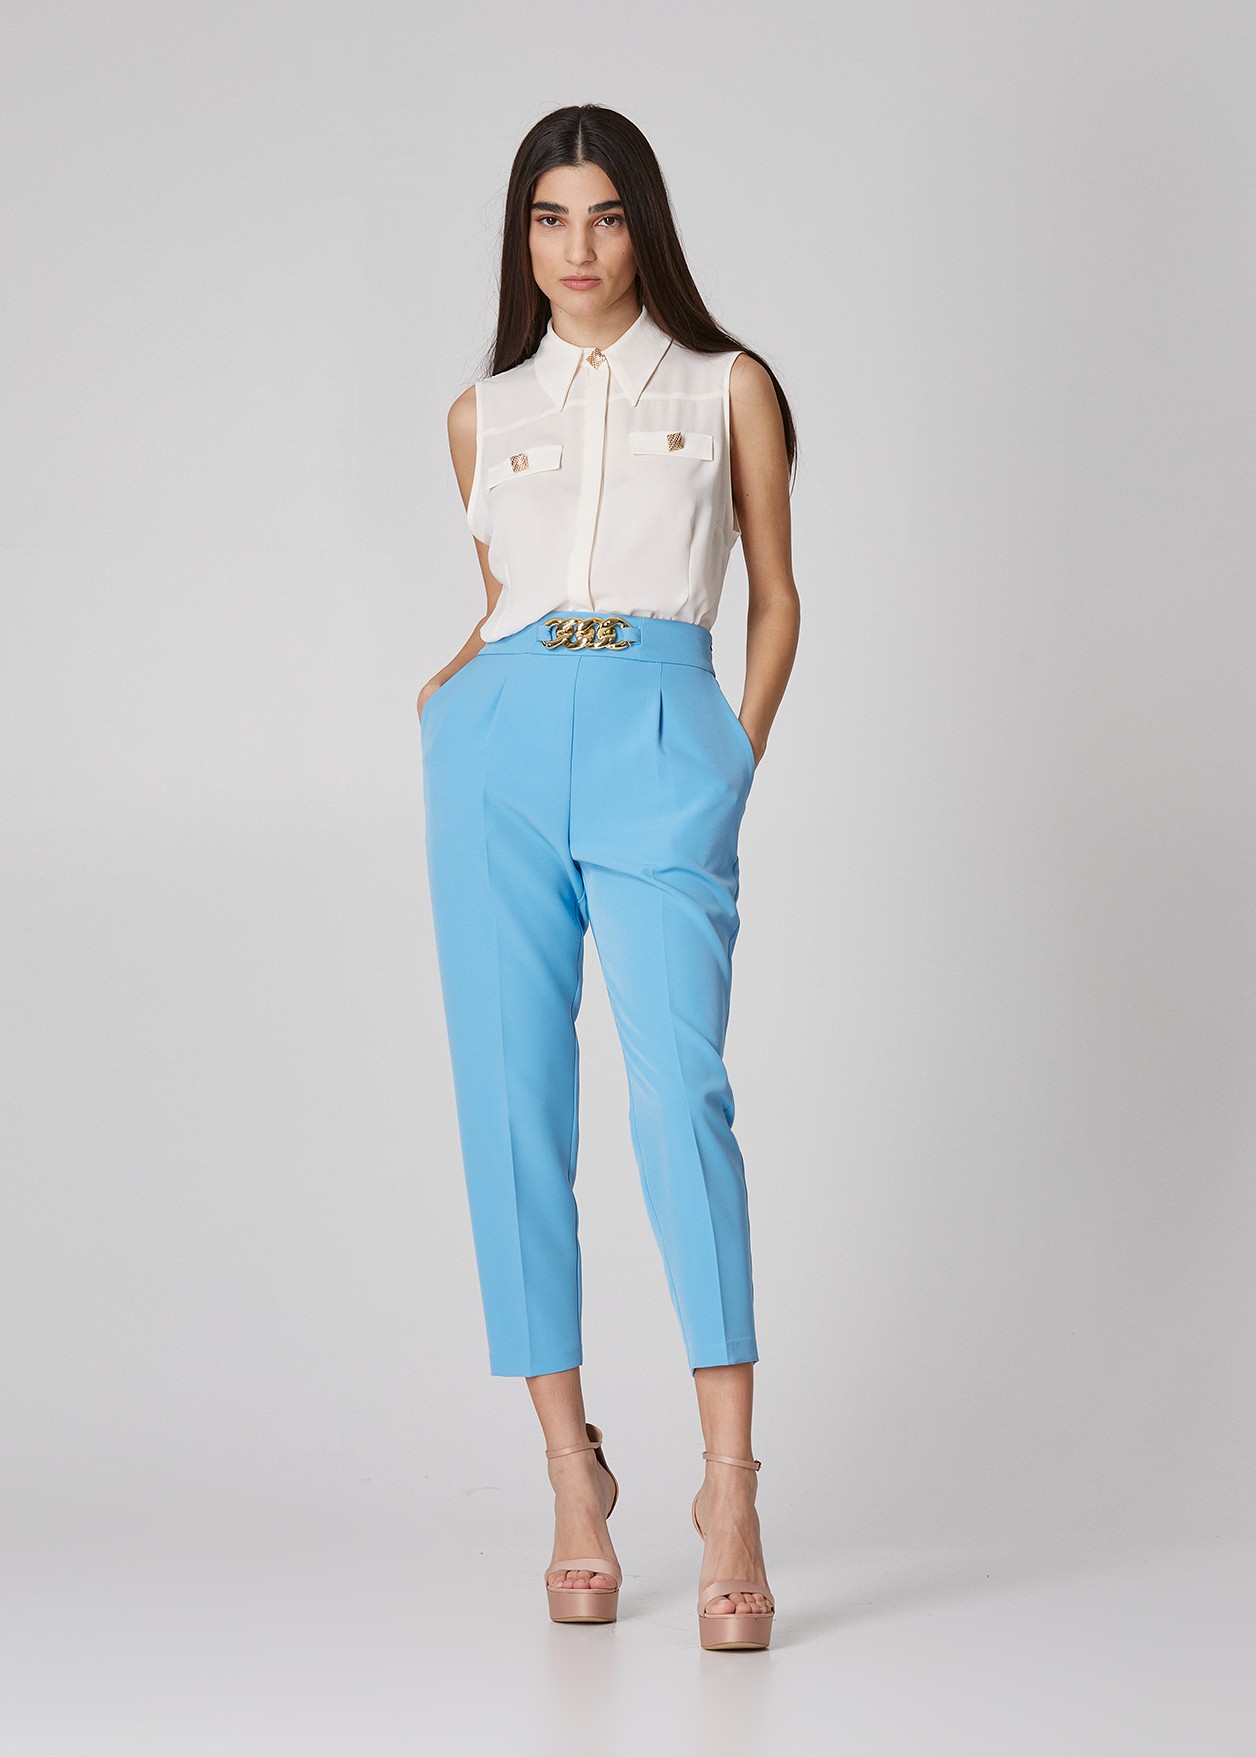 Sleeveless blouse with gold square buttons